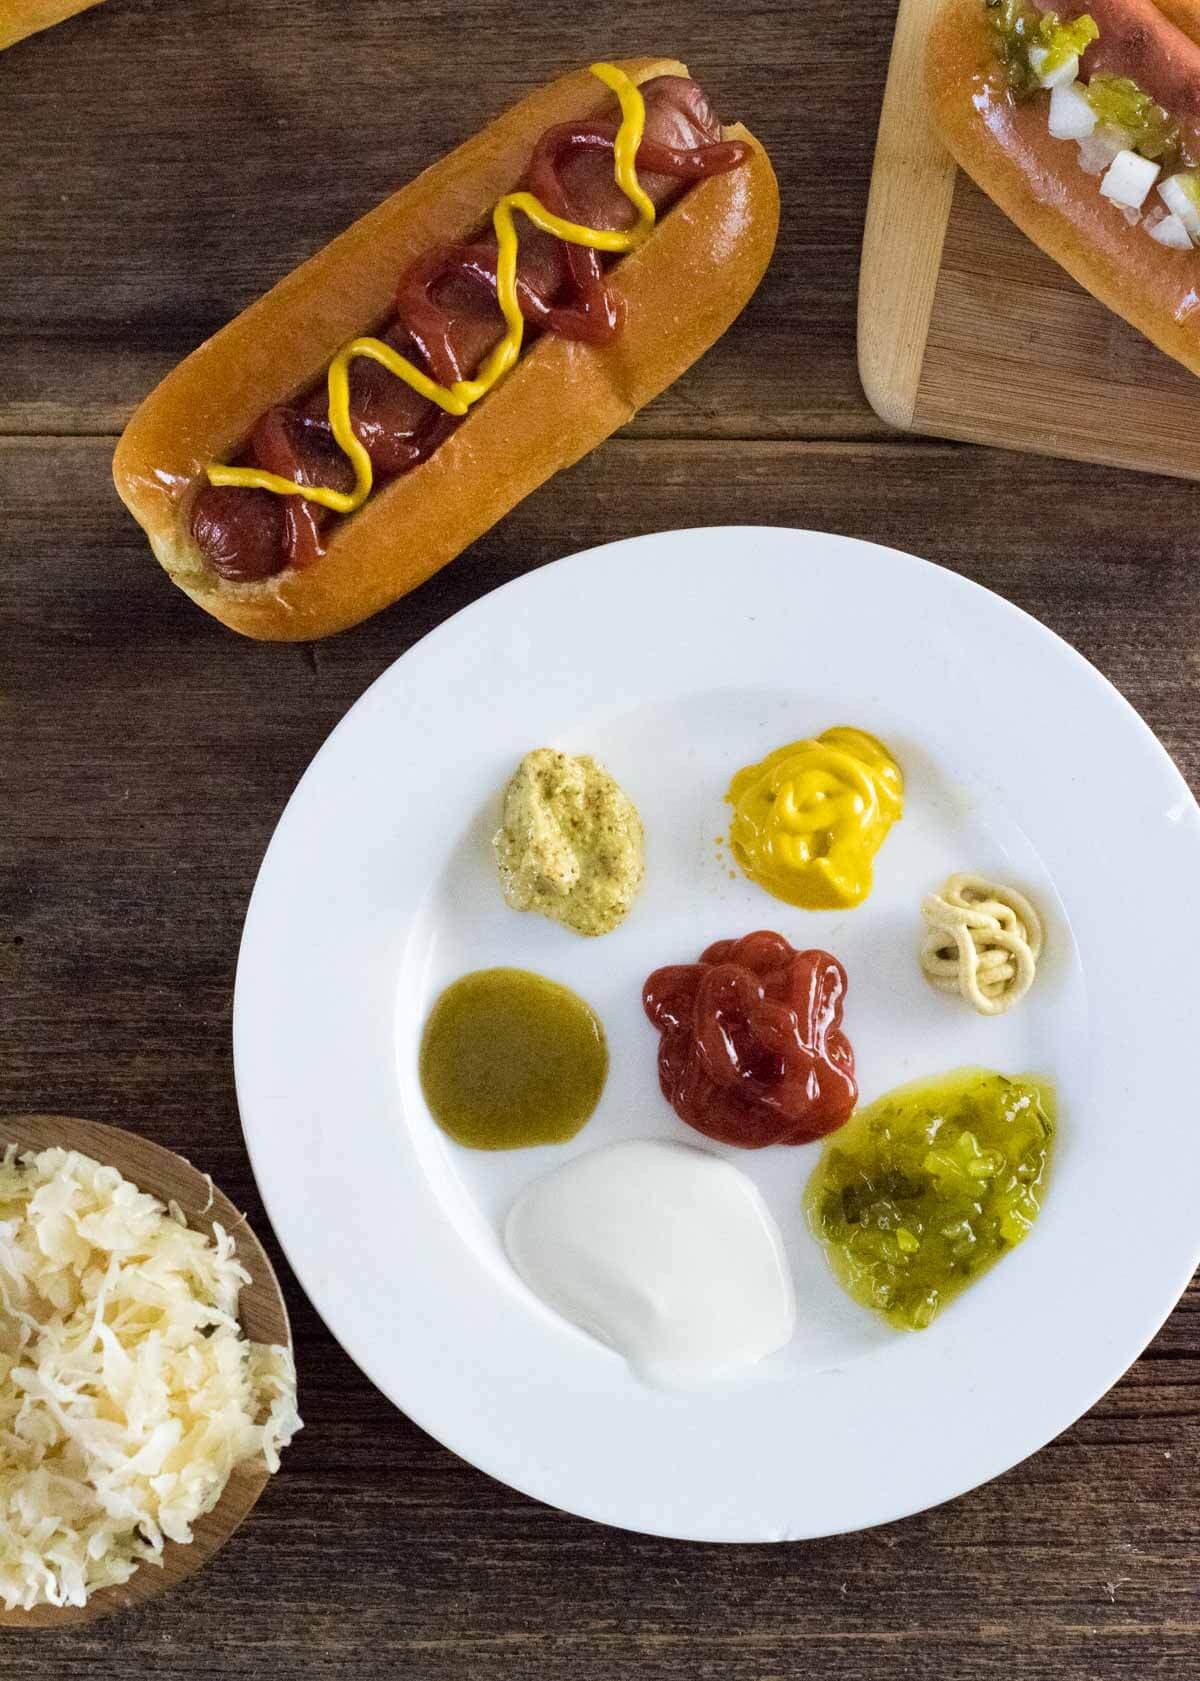 Hot dog condiments on a white plate.